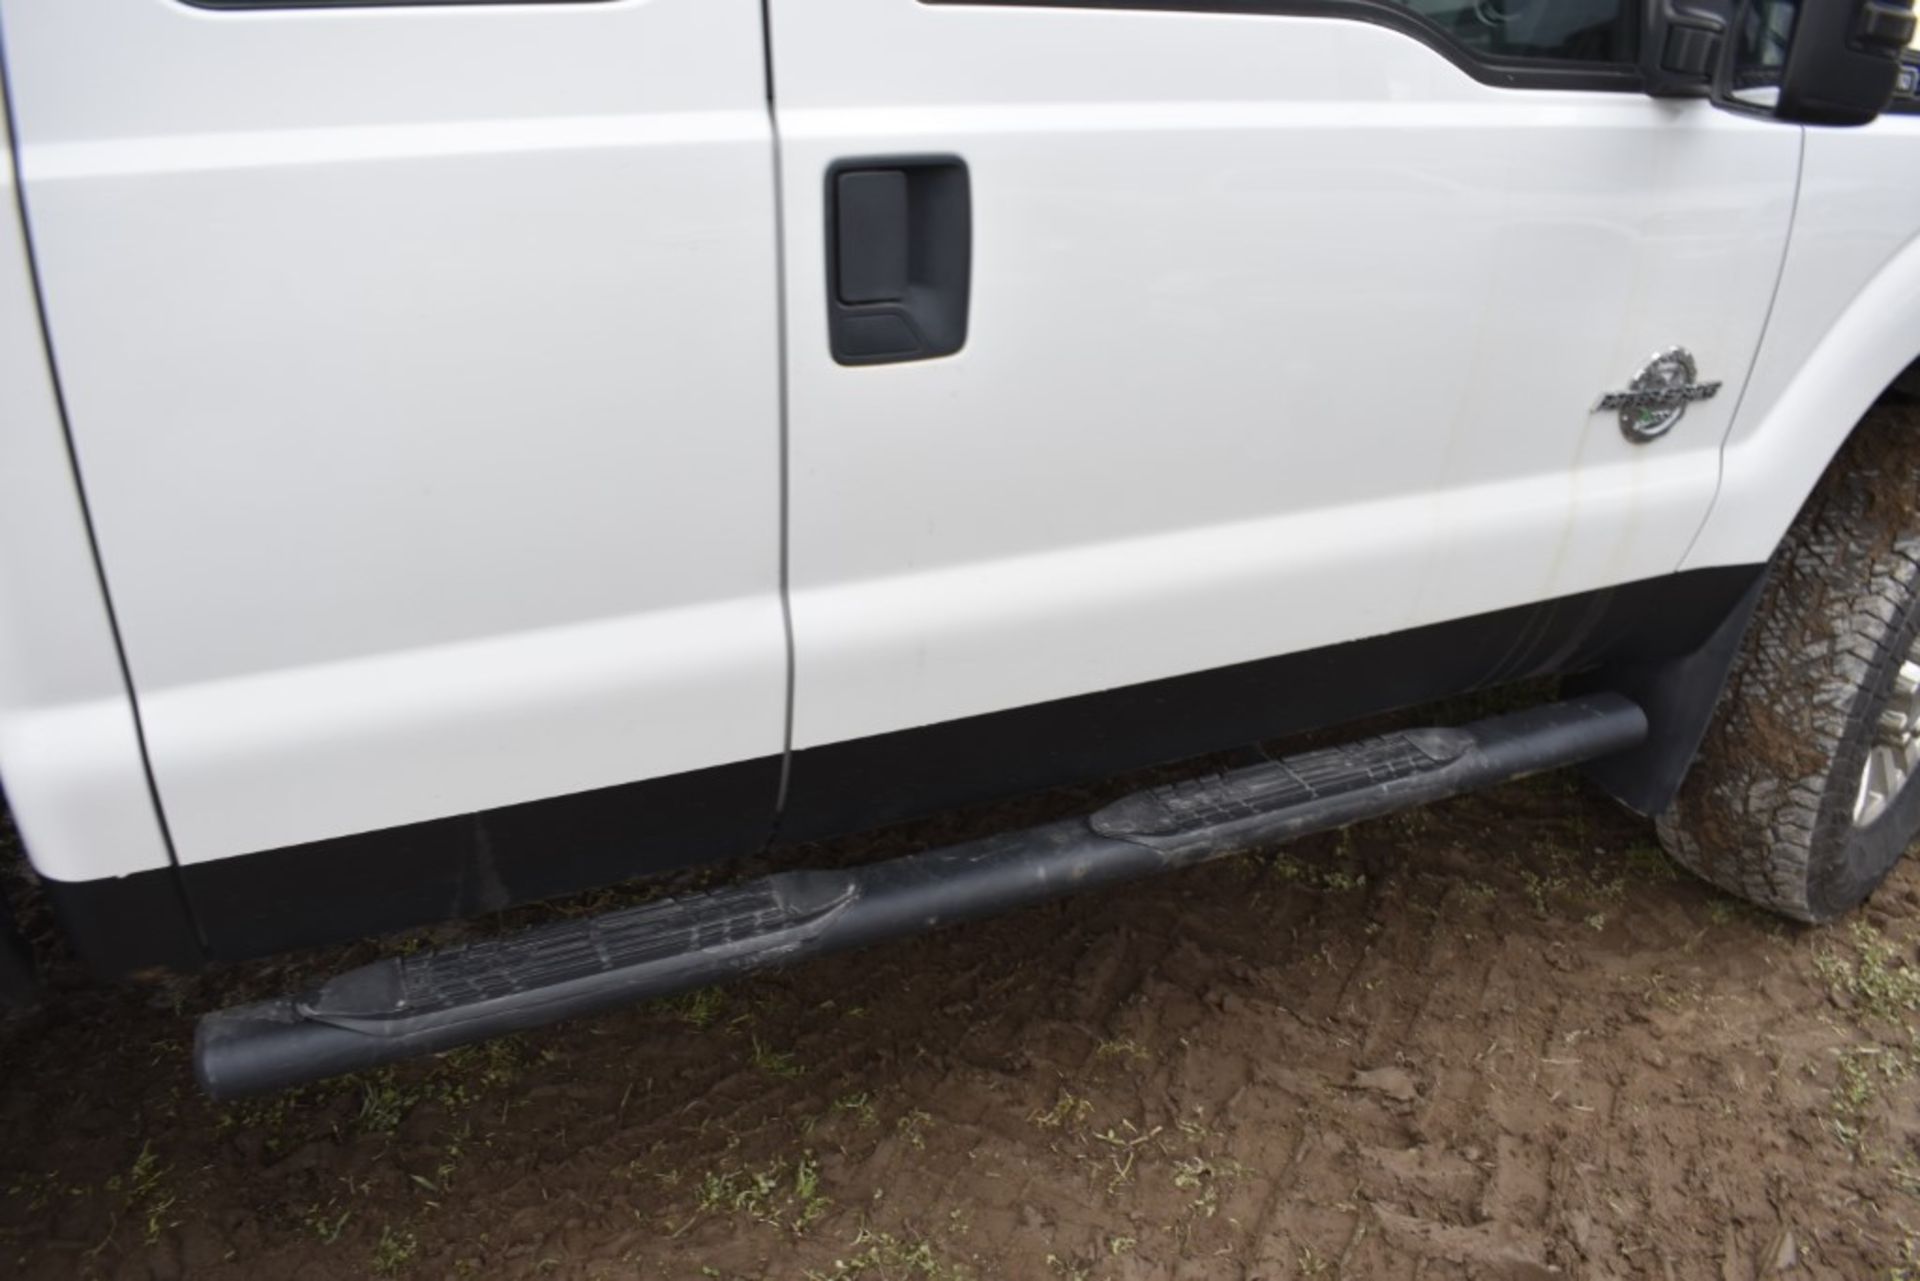 2011 Ford F-250 Super Duty Truck - Image 15 of 40